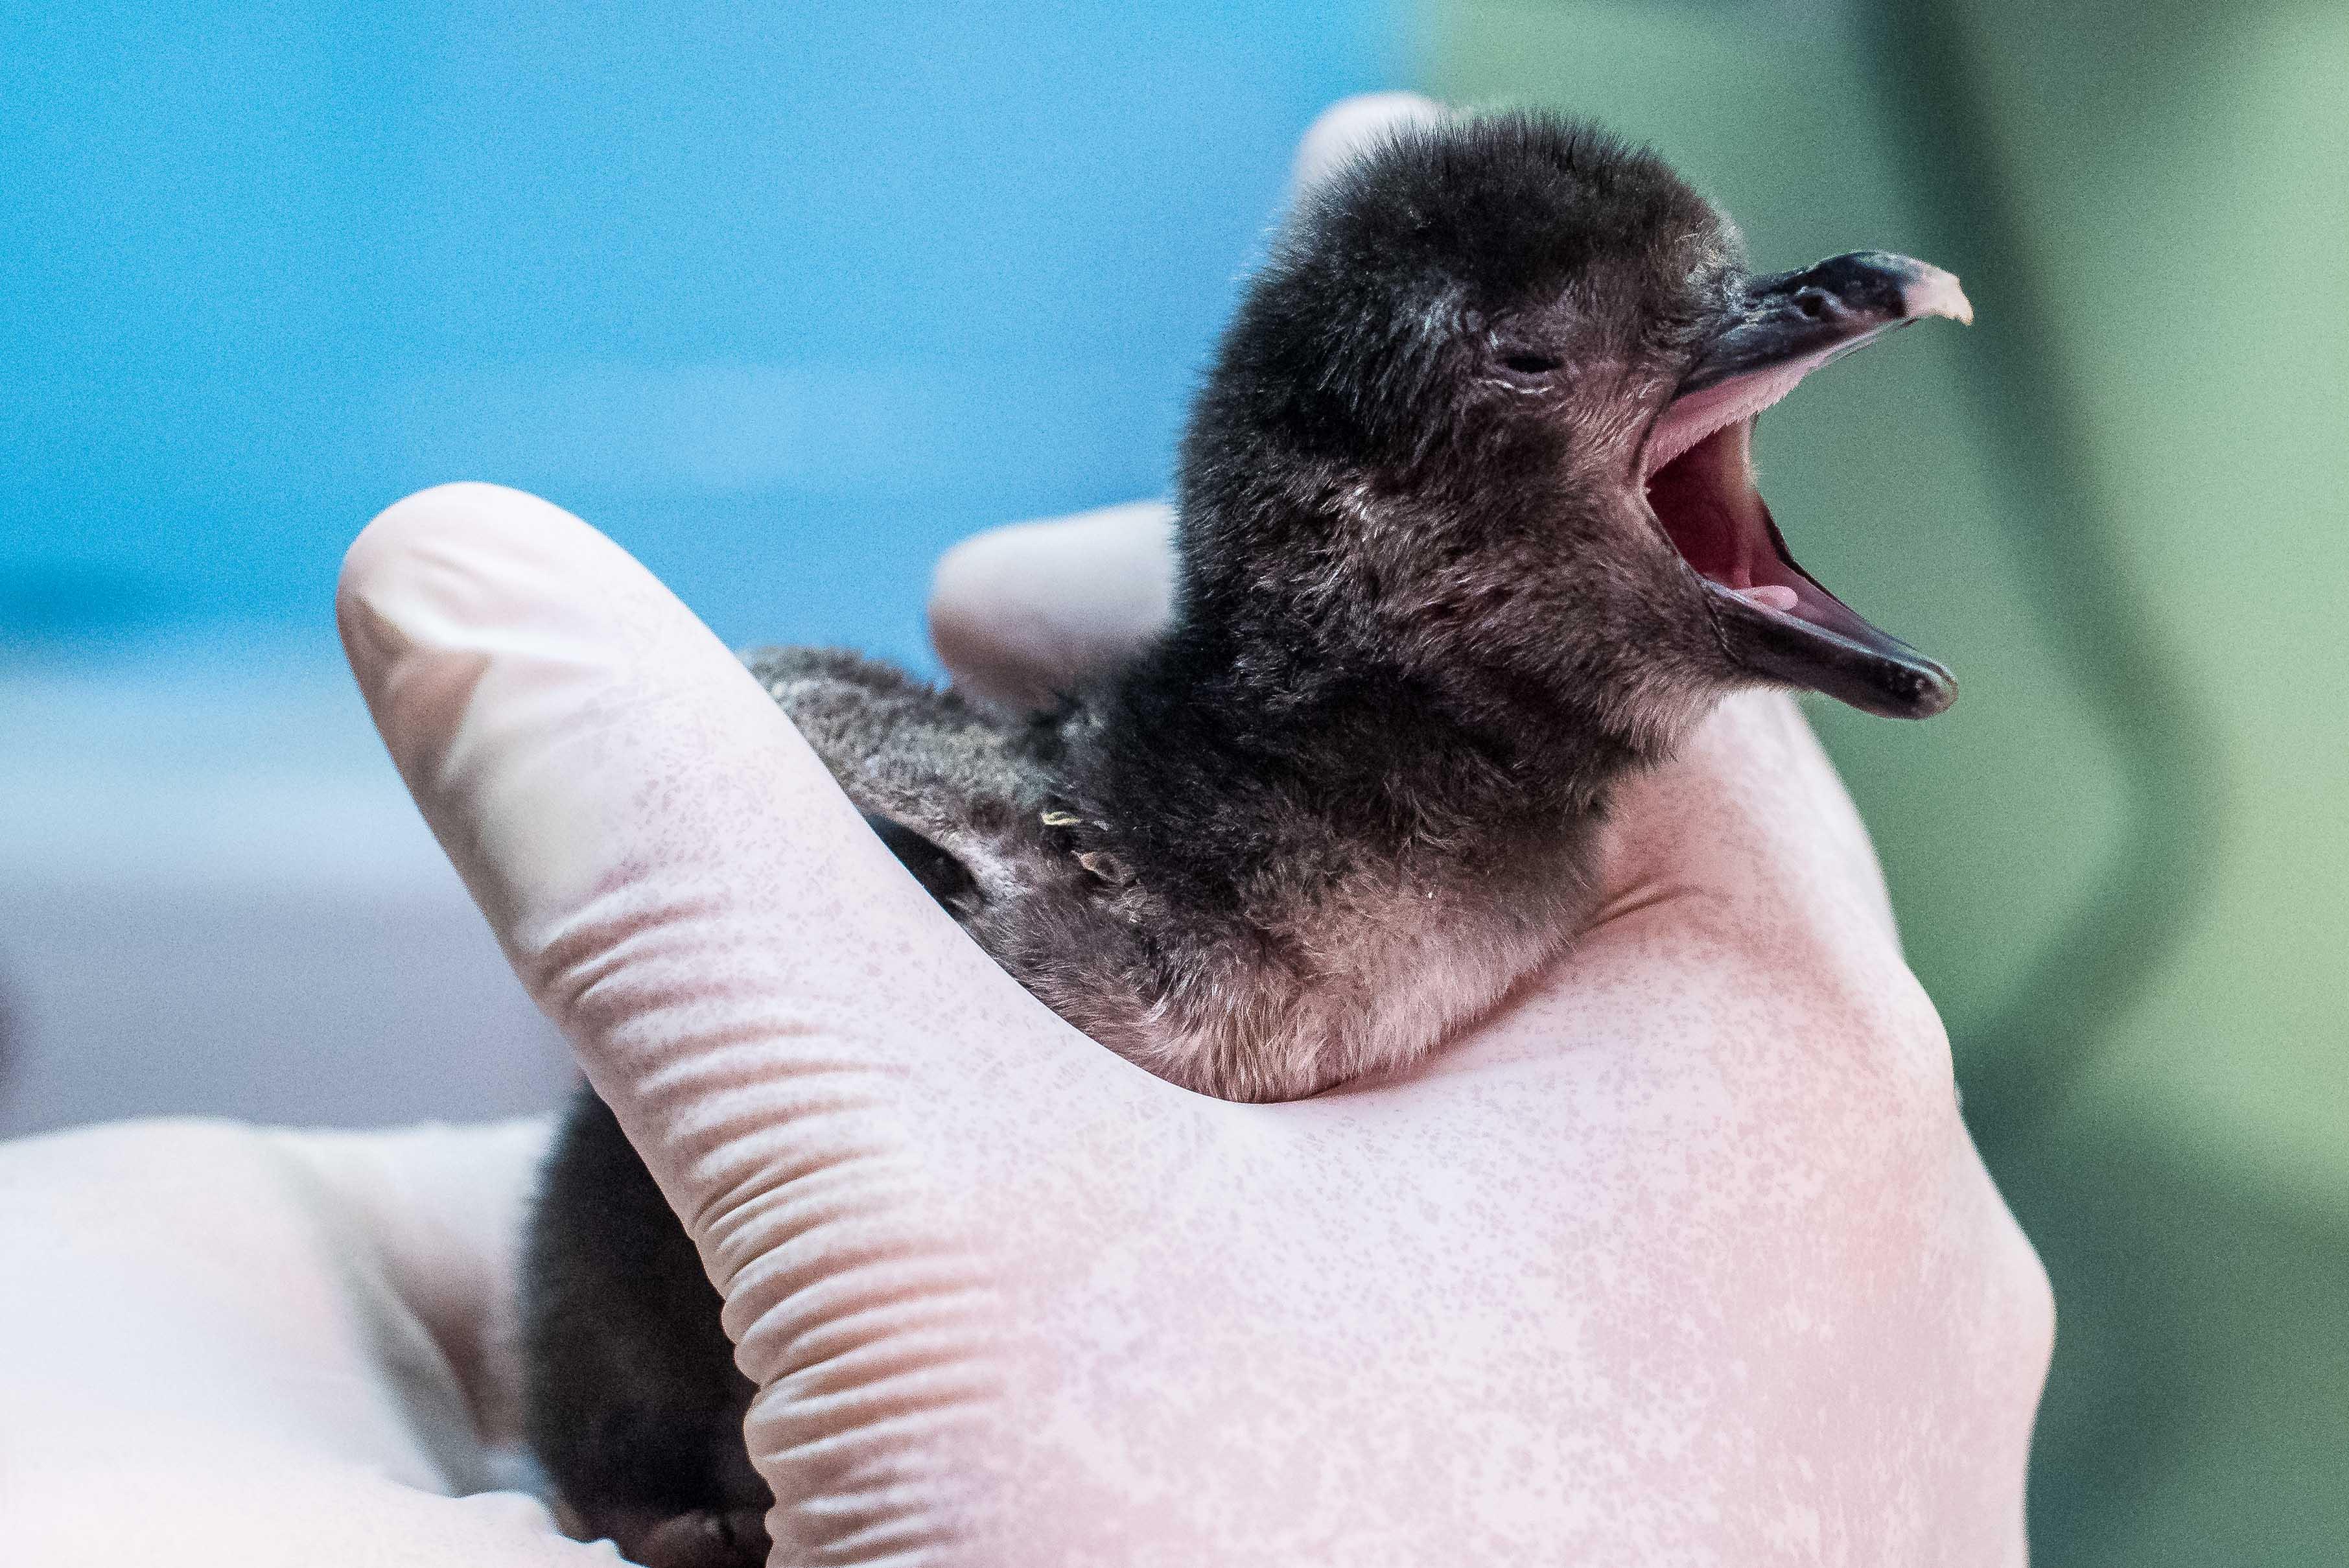 Shedd Aquarium's new penguin chick will remain in a nest behind-the-scenes with its parents for 75 to 90 days. (Courtesy Shedd Aquarium)